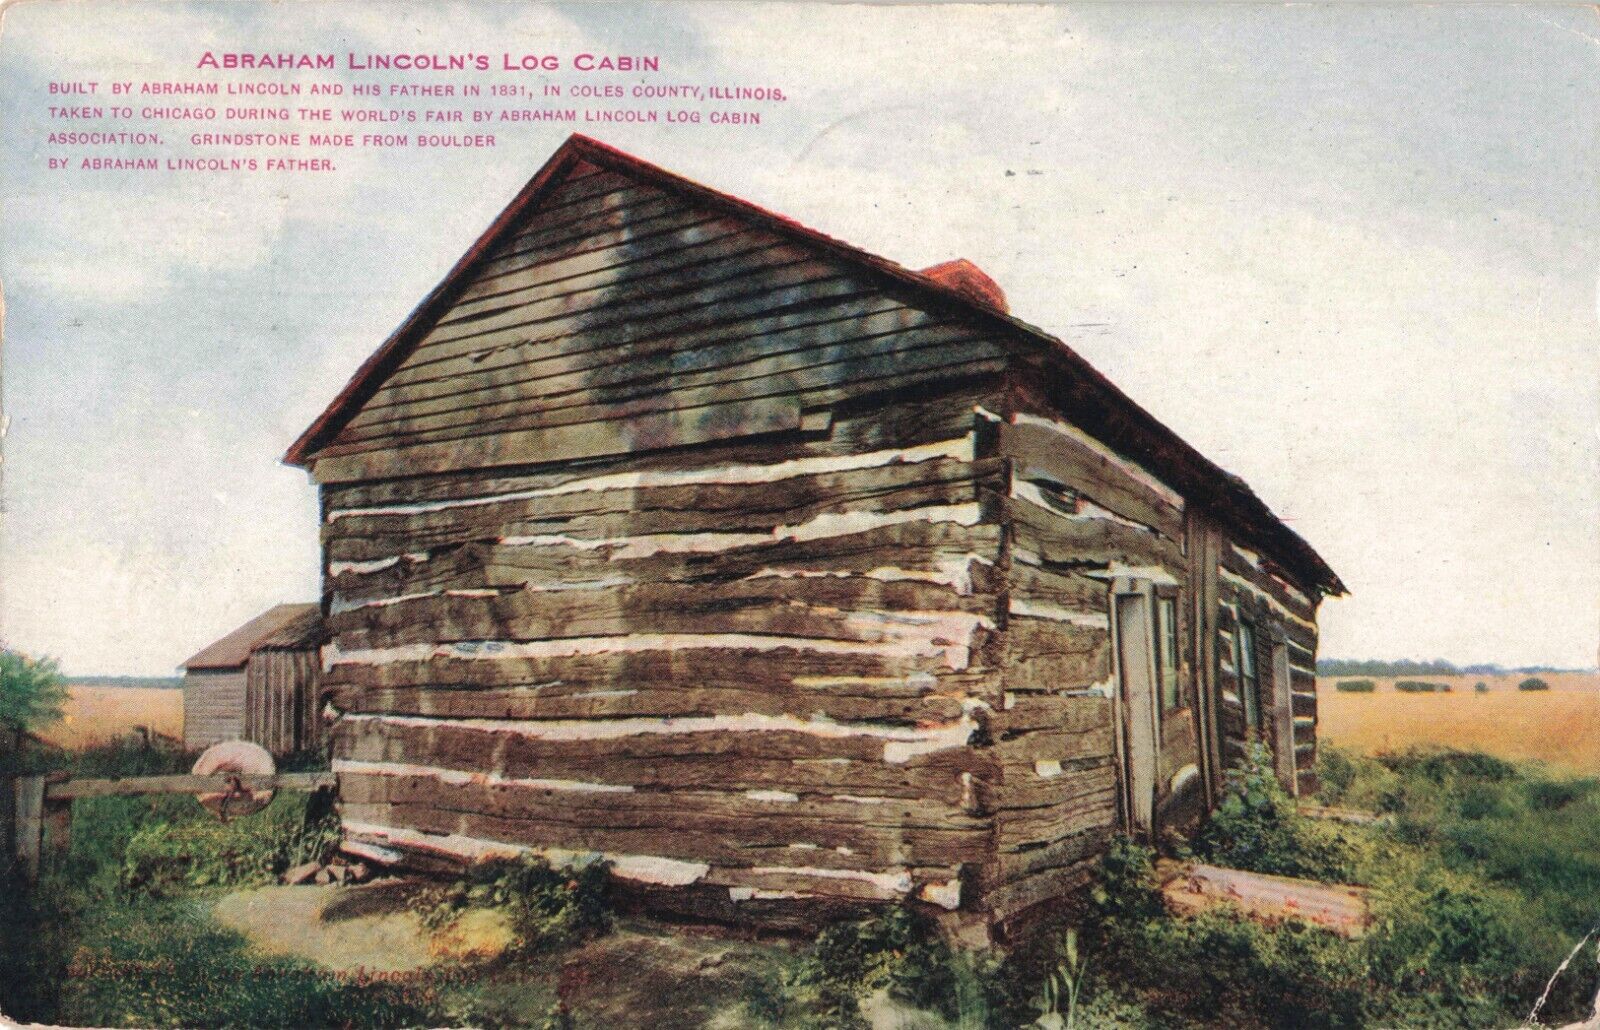 Abraham Lincoln’s Log Cabin built by Lincoln & Father c.1911 Postcard / 10c1-395